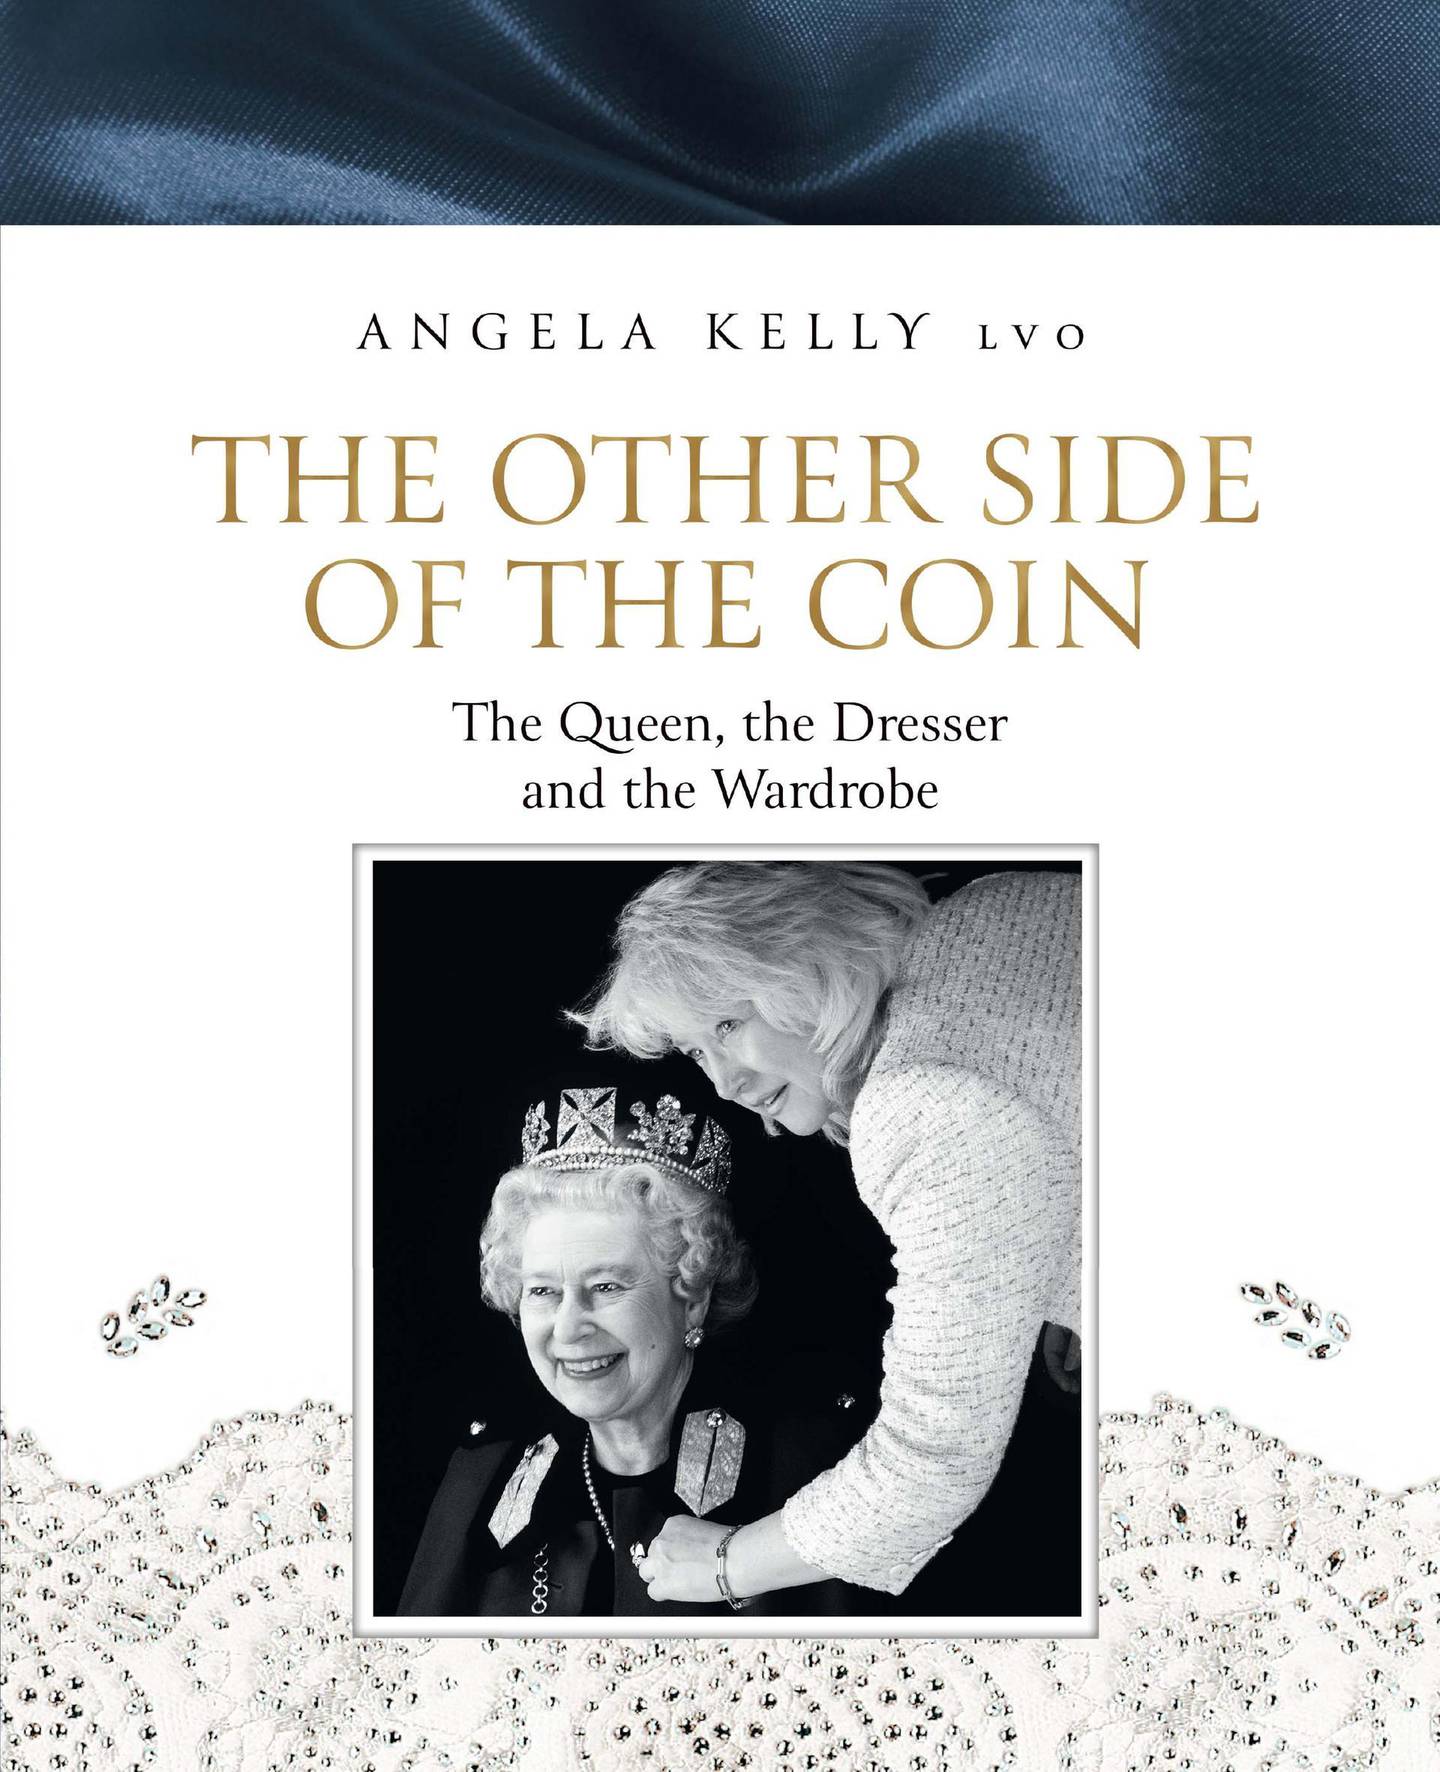 The Other Side of the Coin by Angela Kelly. Courtesy HarperCollins UK